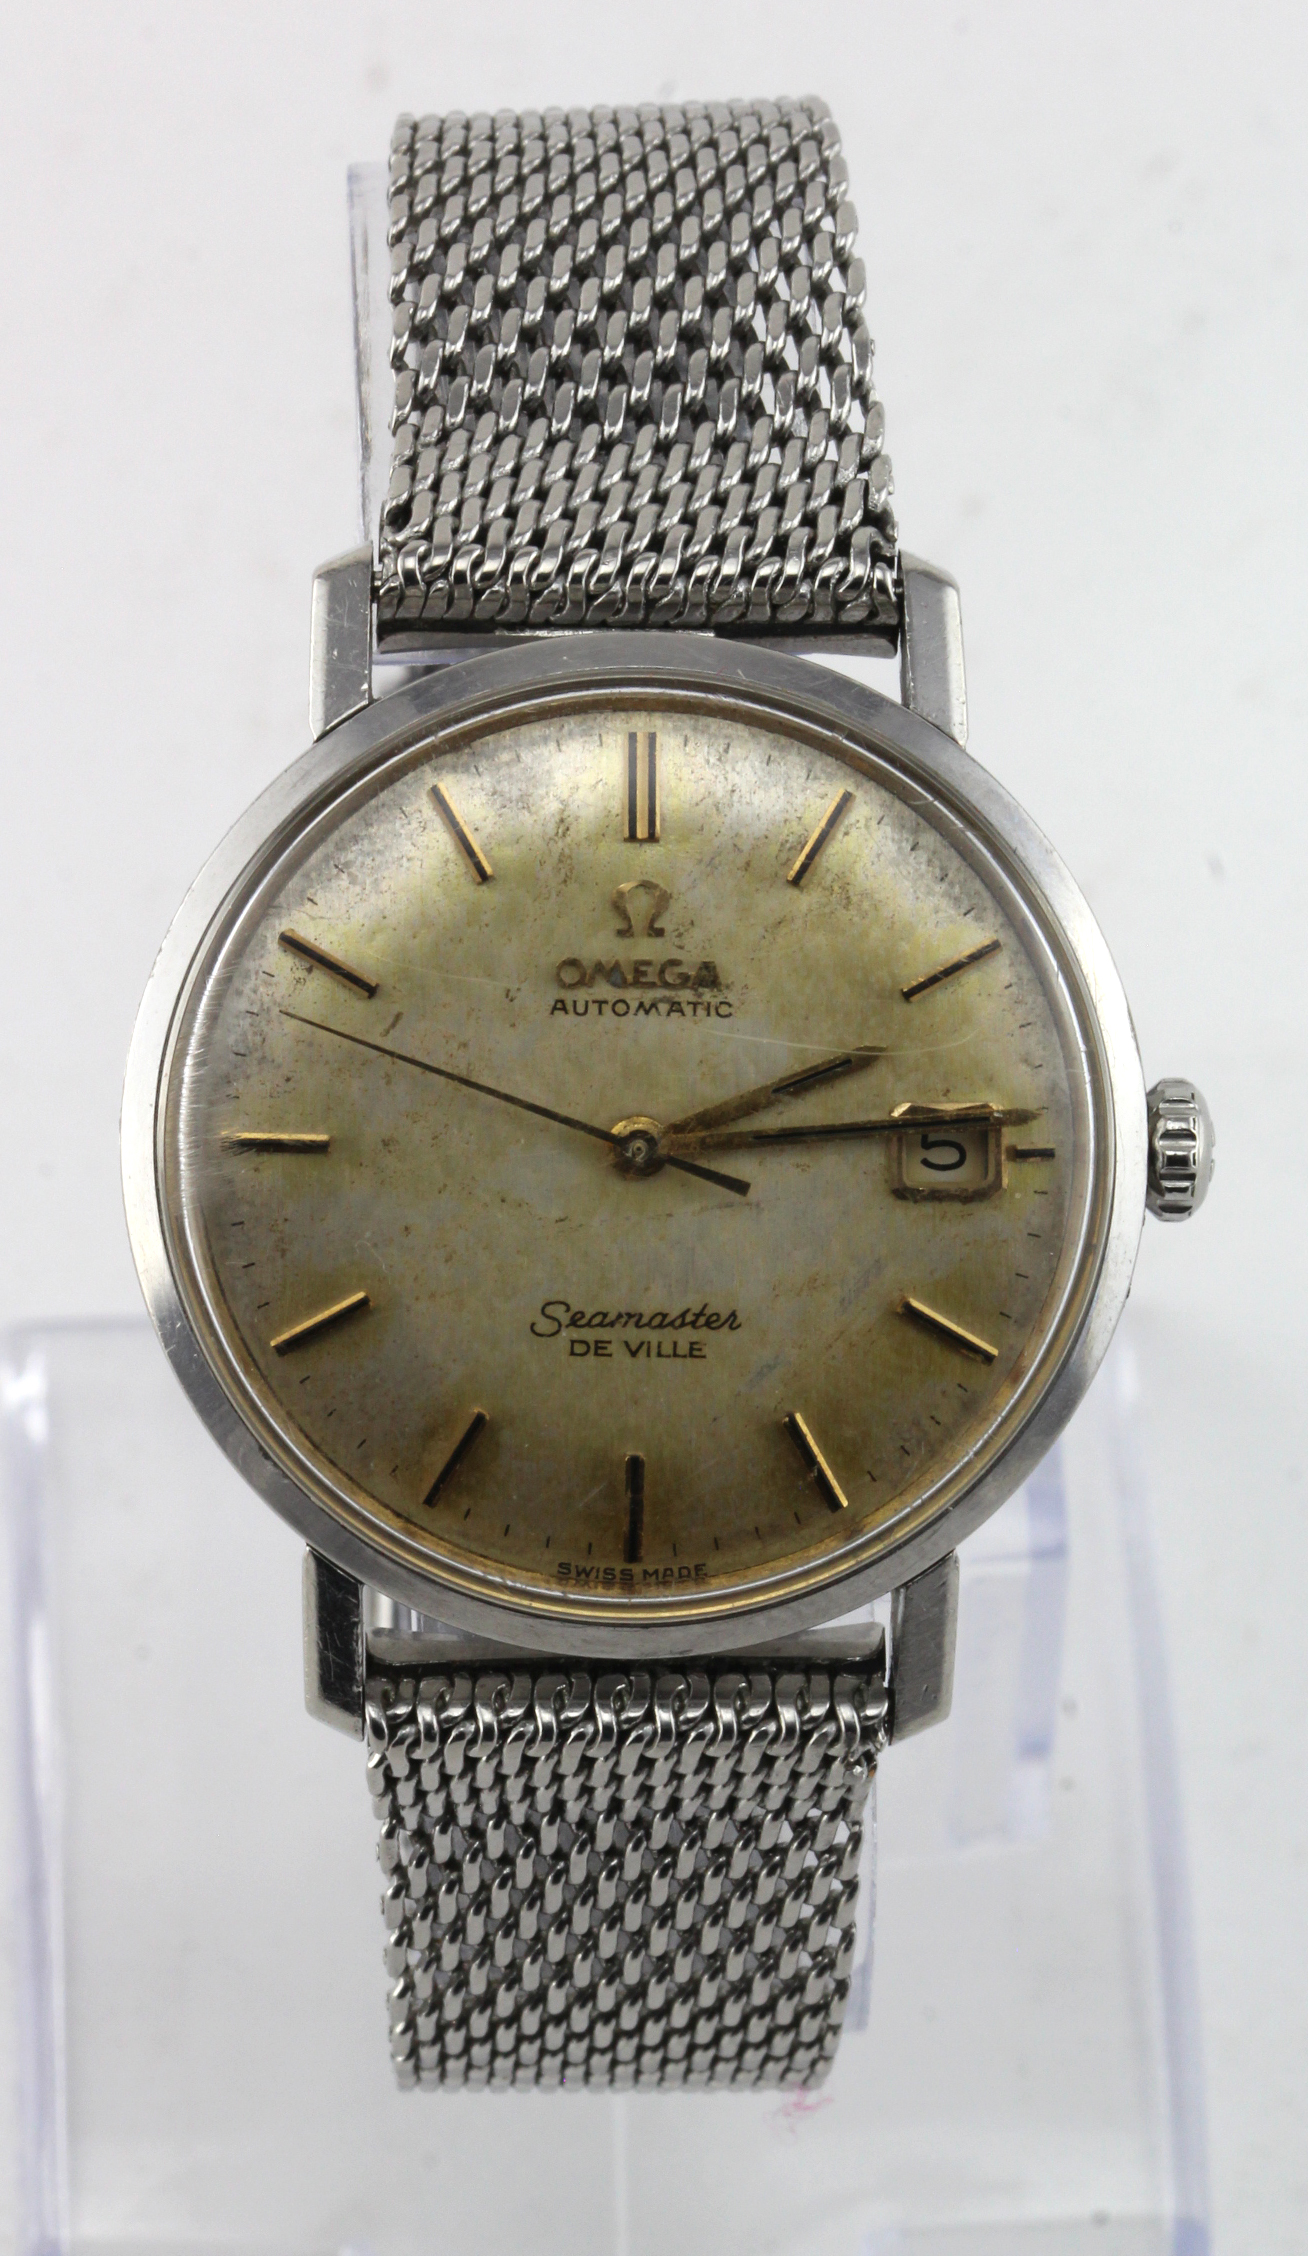 Gents stainless steel cased Omega Seamaster De Ville automatic wristwatch circa 1964/65. The dial